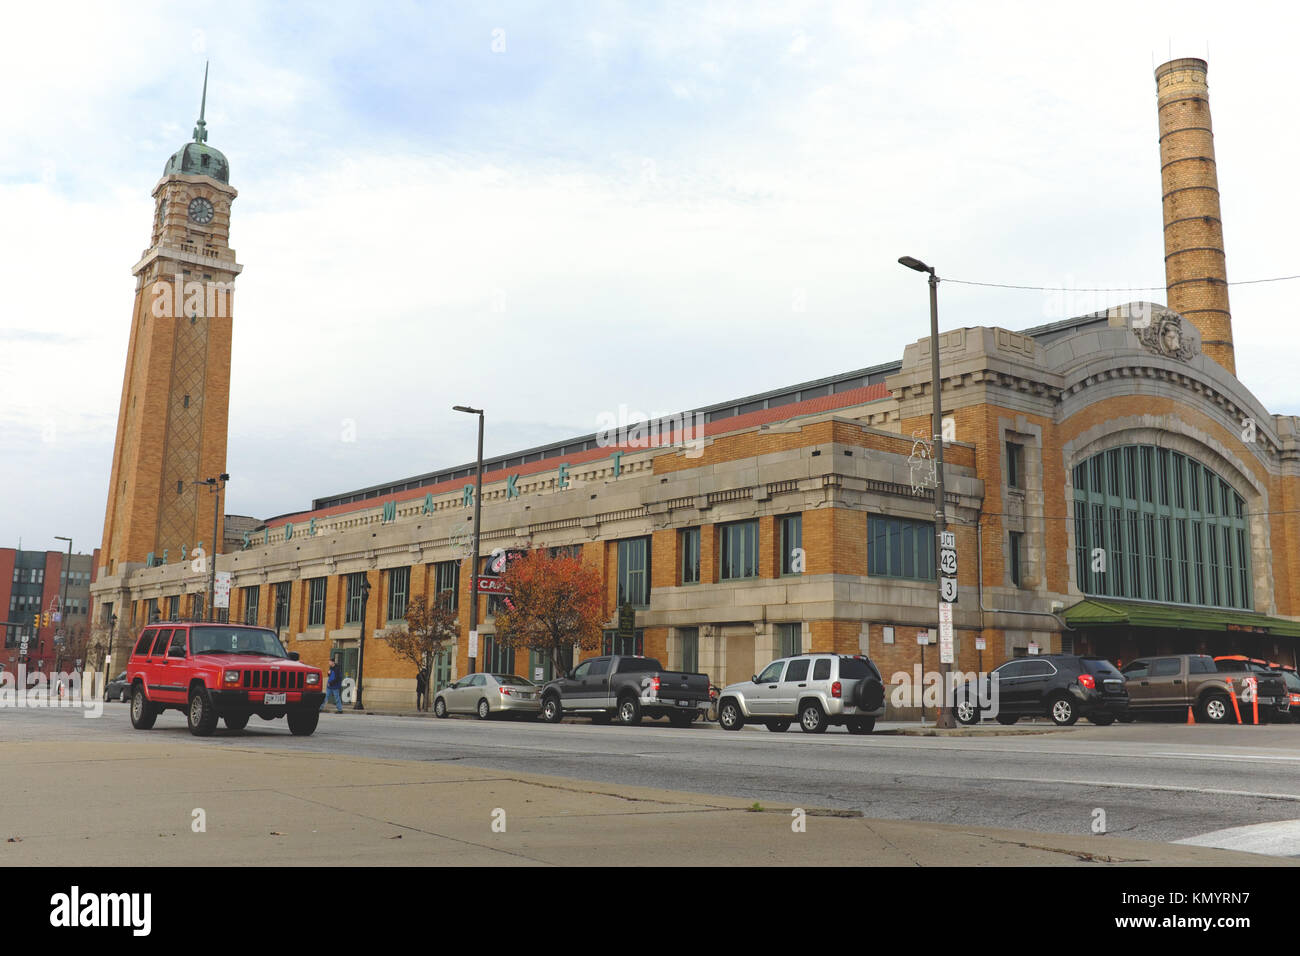 Since 1912 the Cleveland West Side Market in Cleveland, Ohio has been a functioning iconic landmark in which local food vendors ply their goods. Stock Photo